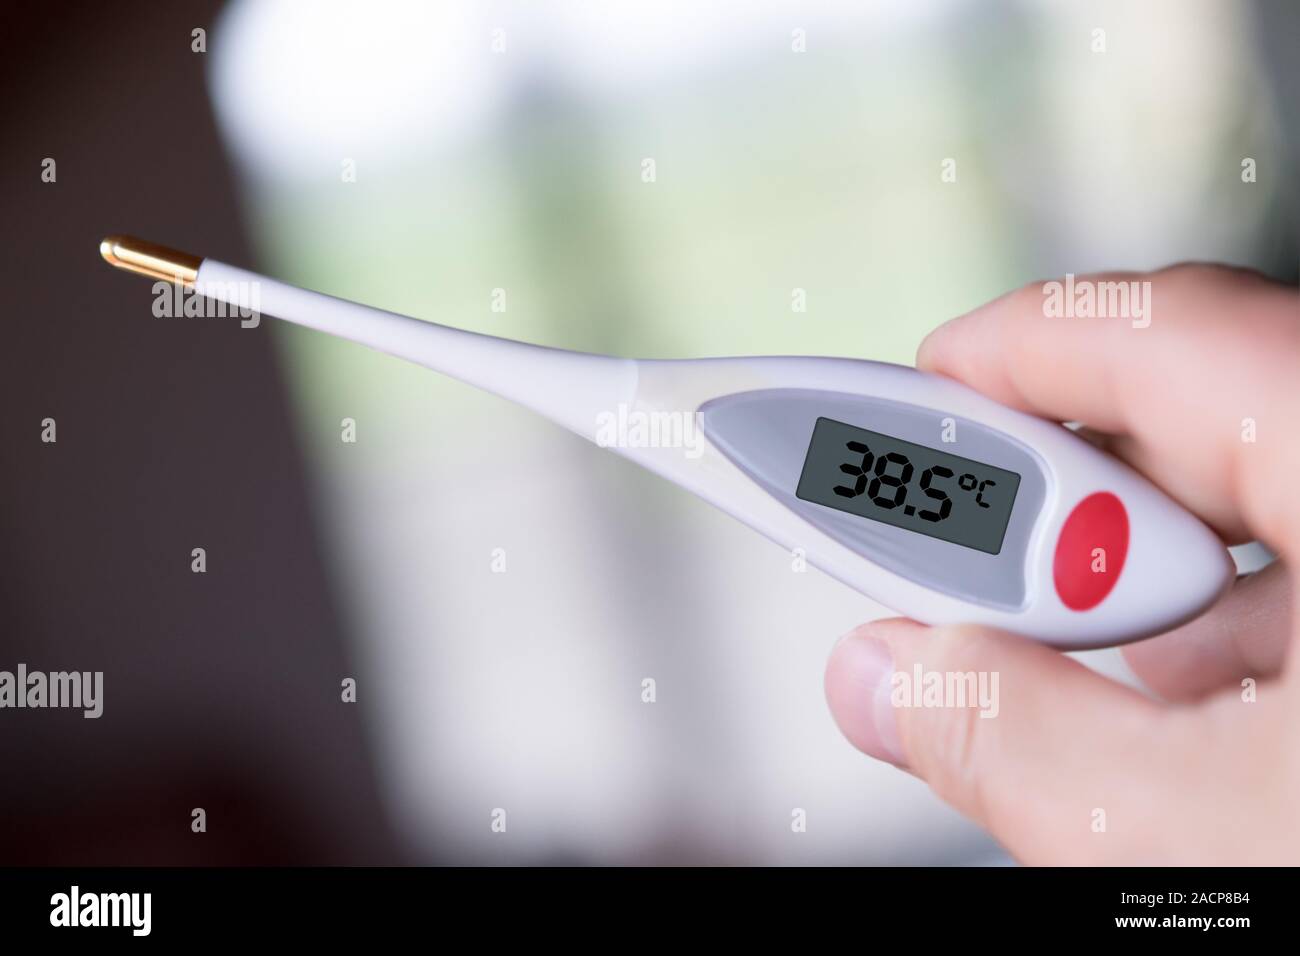 Picture of a fever thermometer indicating 38.5 degrees Celsius Stock Photo